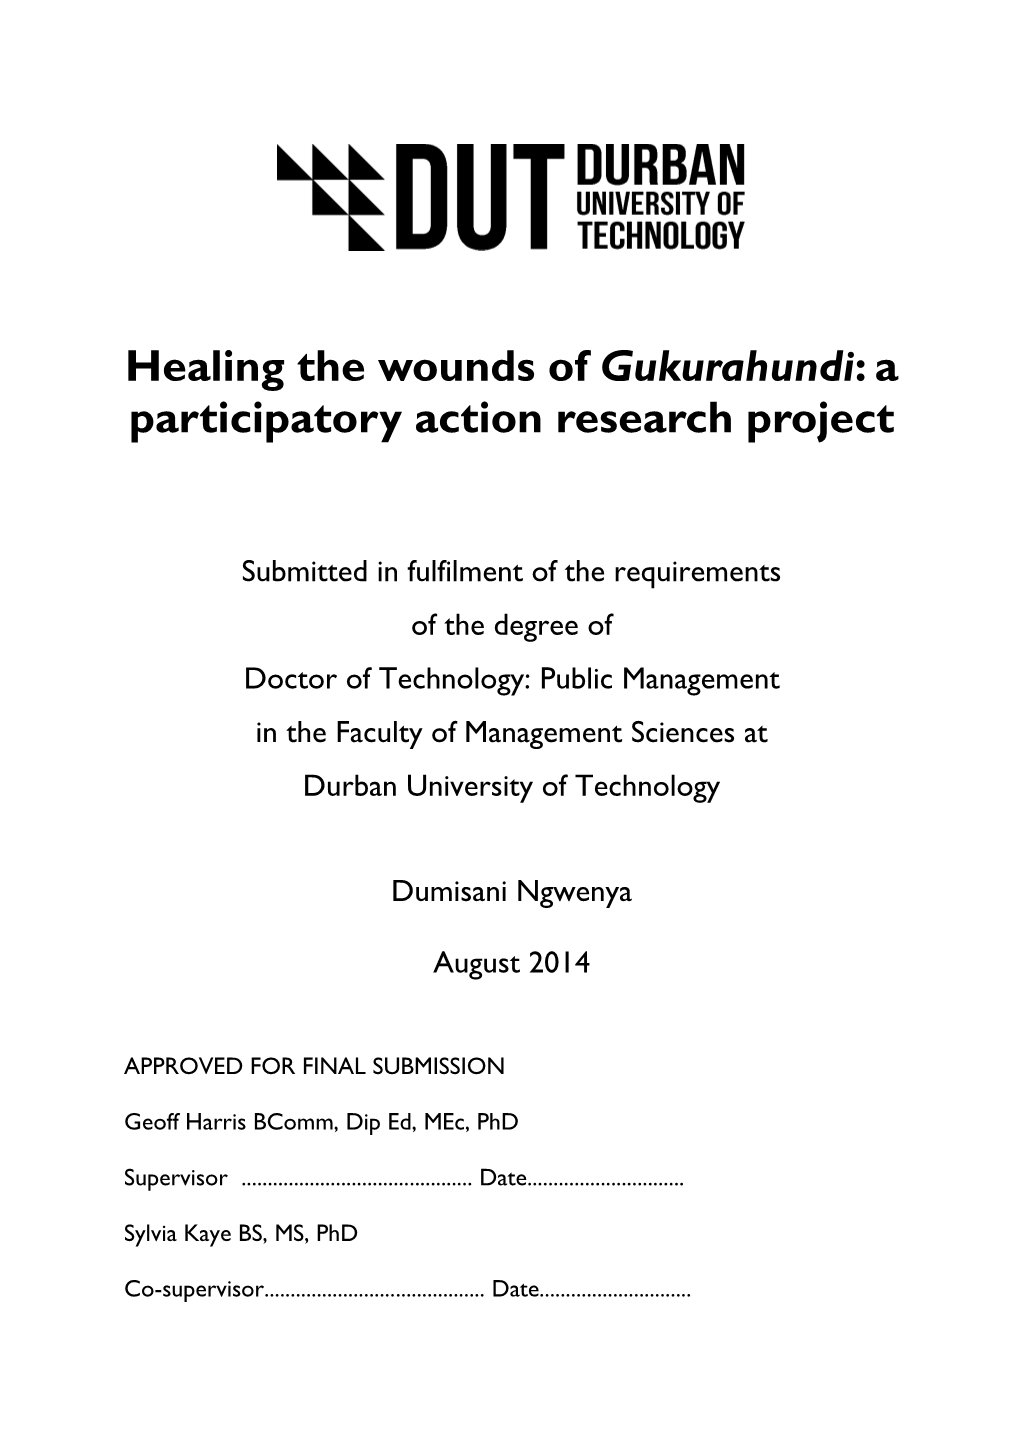 Healing the Wounds of Gukurahundi: a Participatory Action Research Project